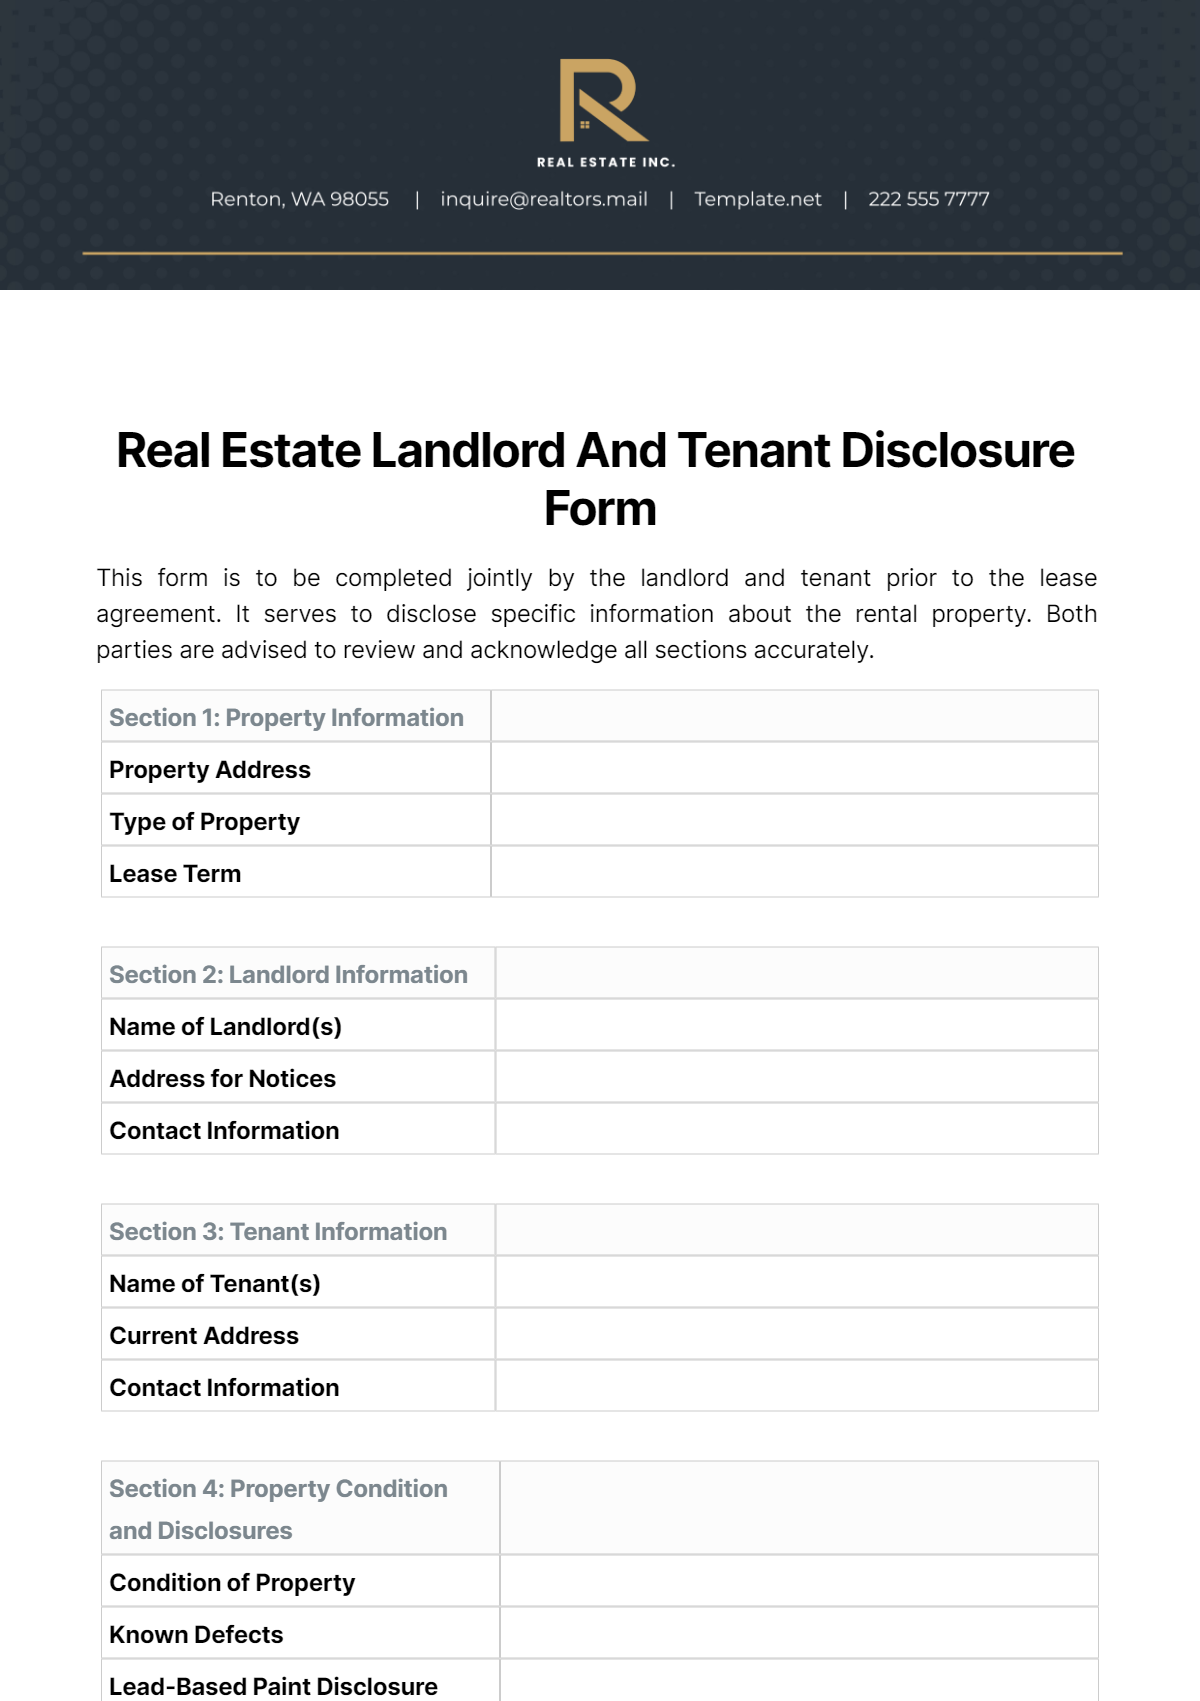 Free Real Estate Landlord And Tenant Disclosure Form Template